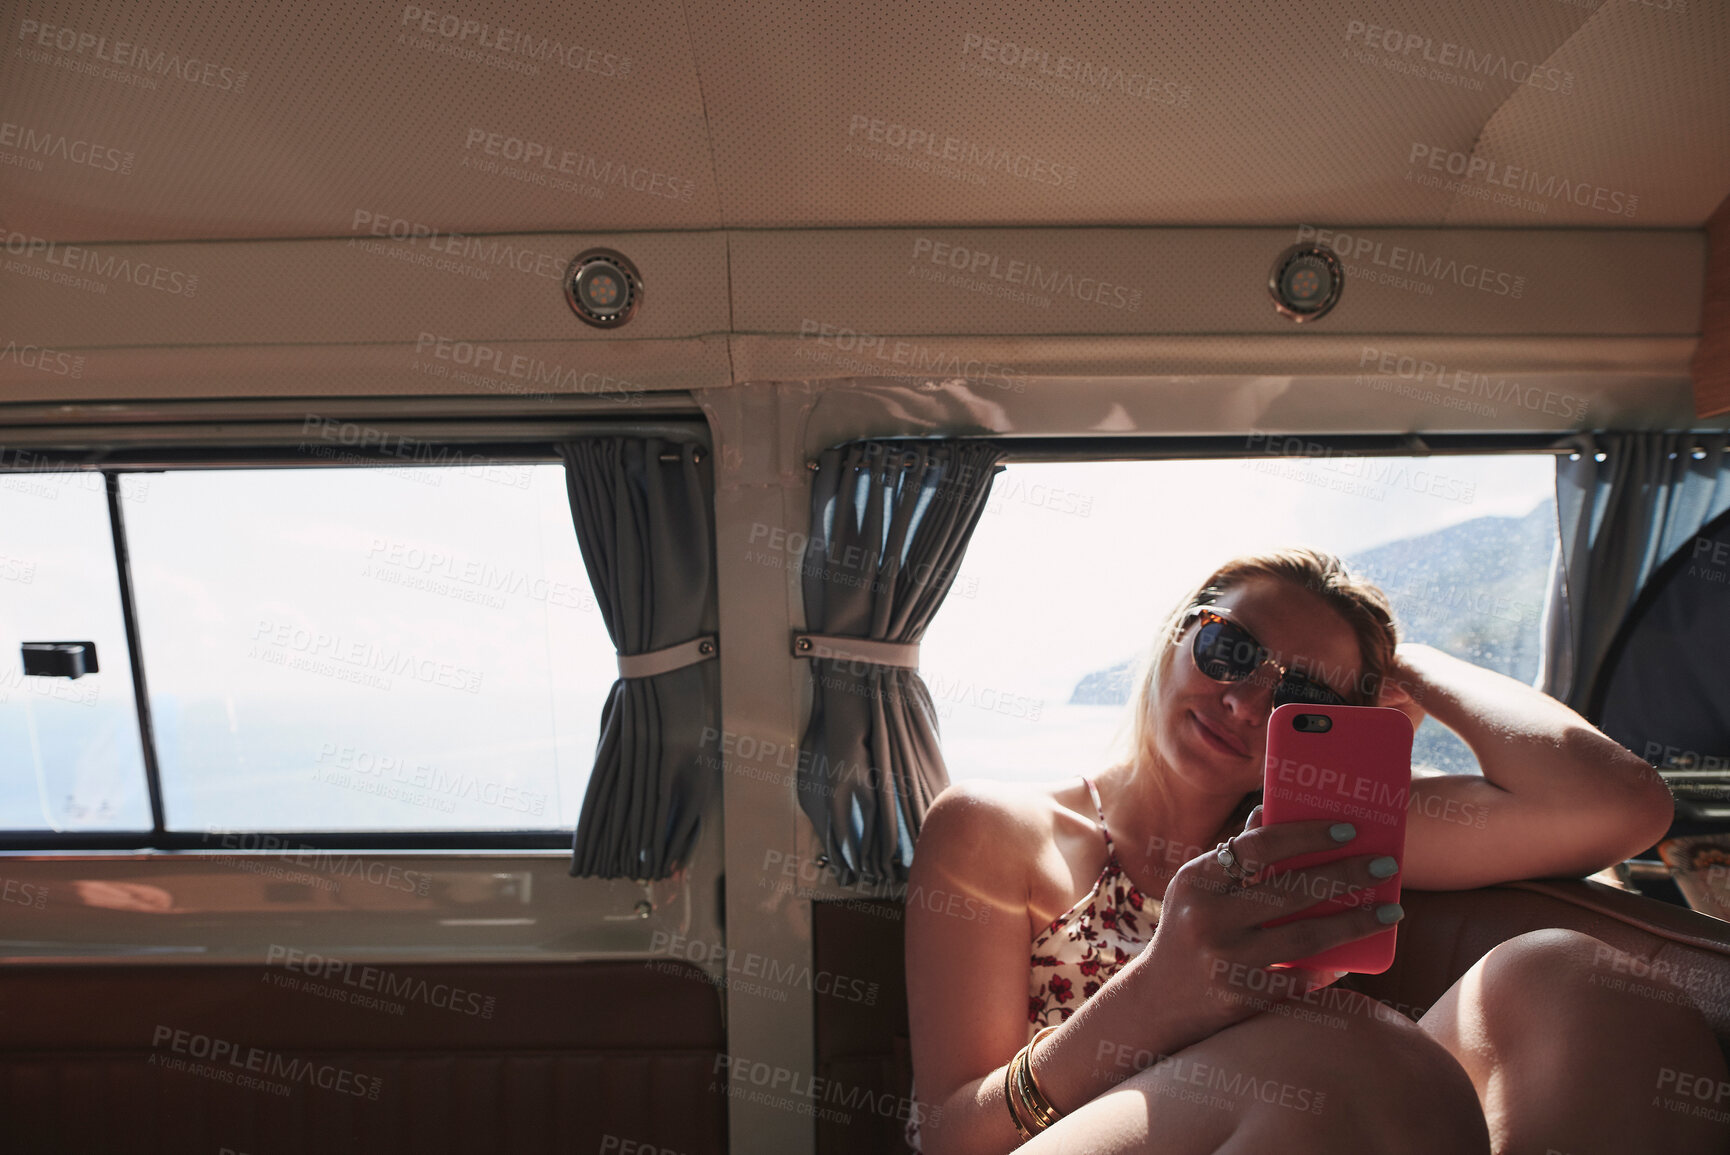 Buy stock photo Shot of an attractive young woman sitting in a car and using her cellphone during her holiday in Italy